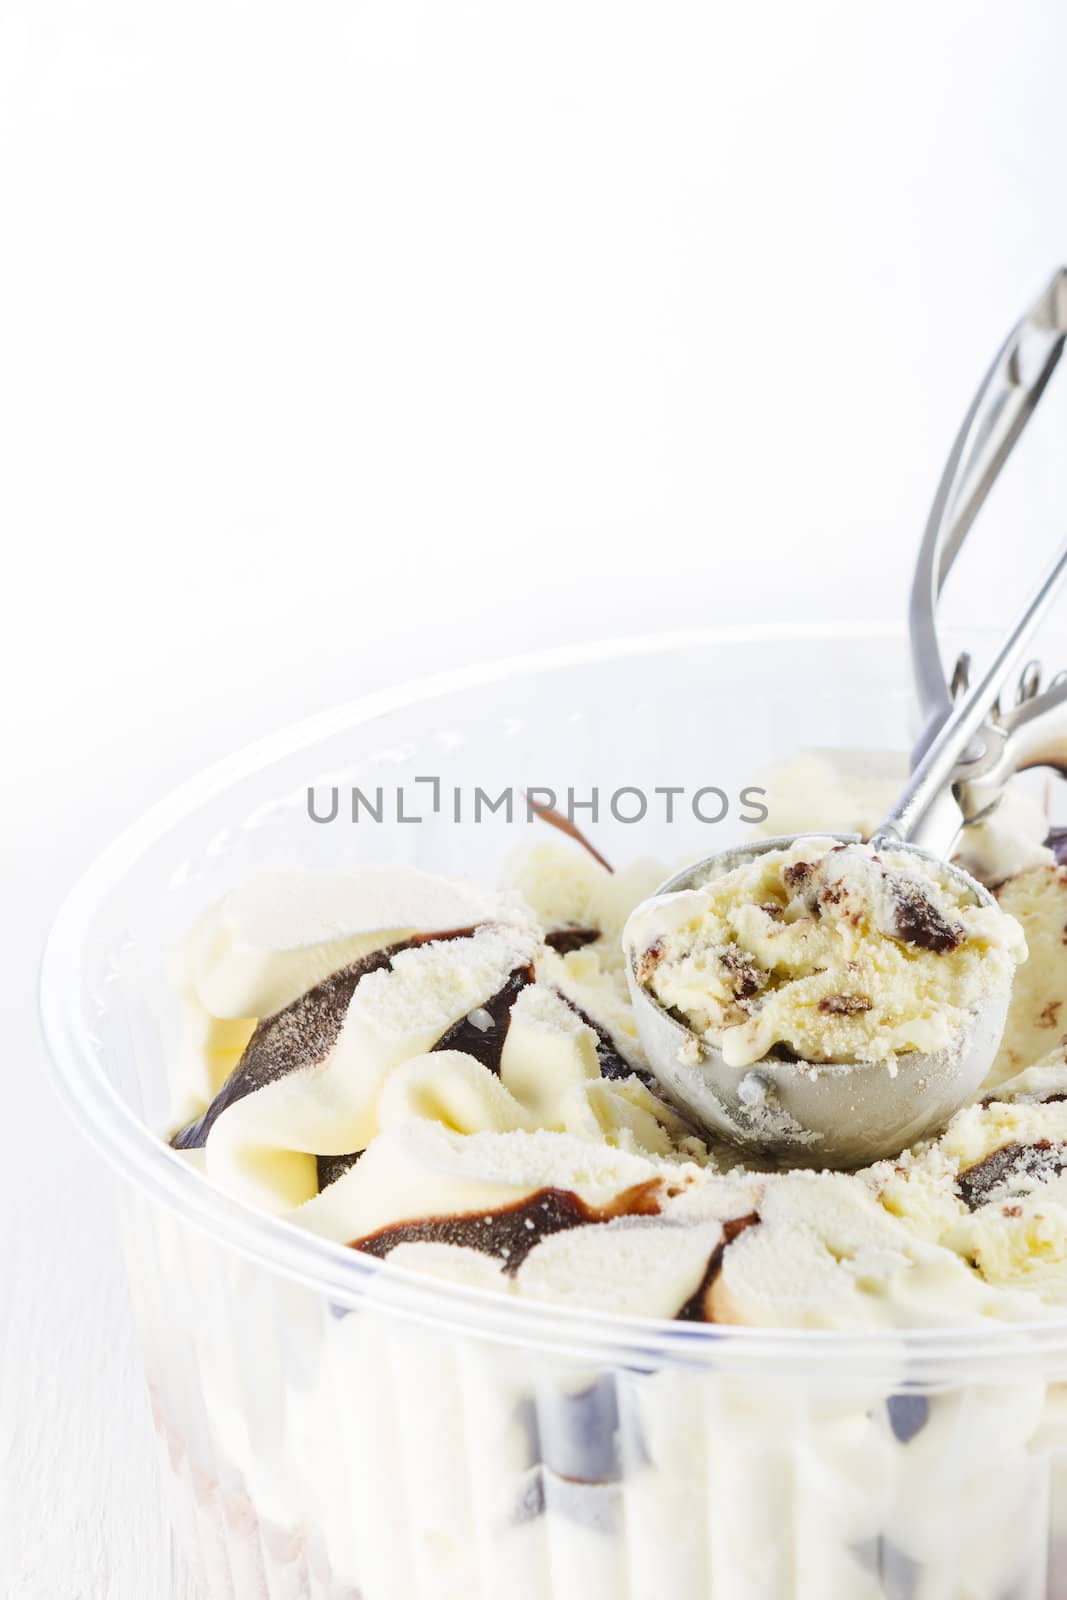 Vanilla with chocolate ice cream scoop scooped out of a container on white wooden background